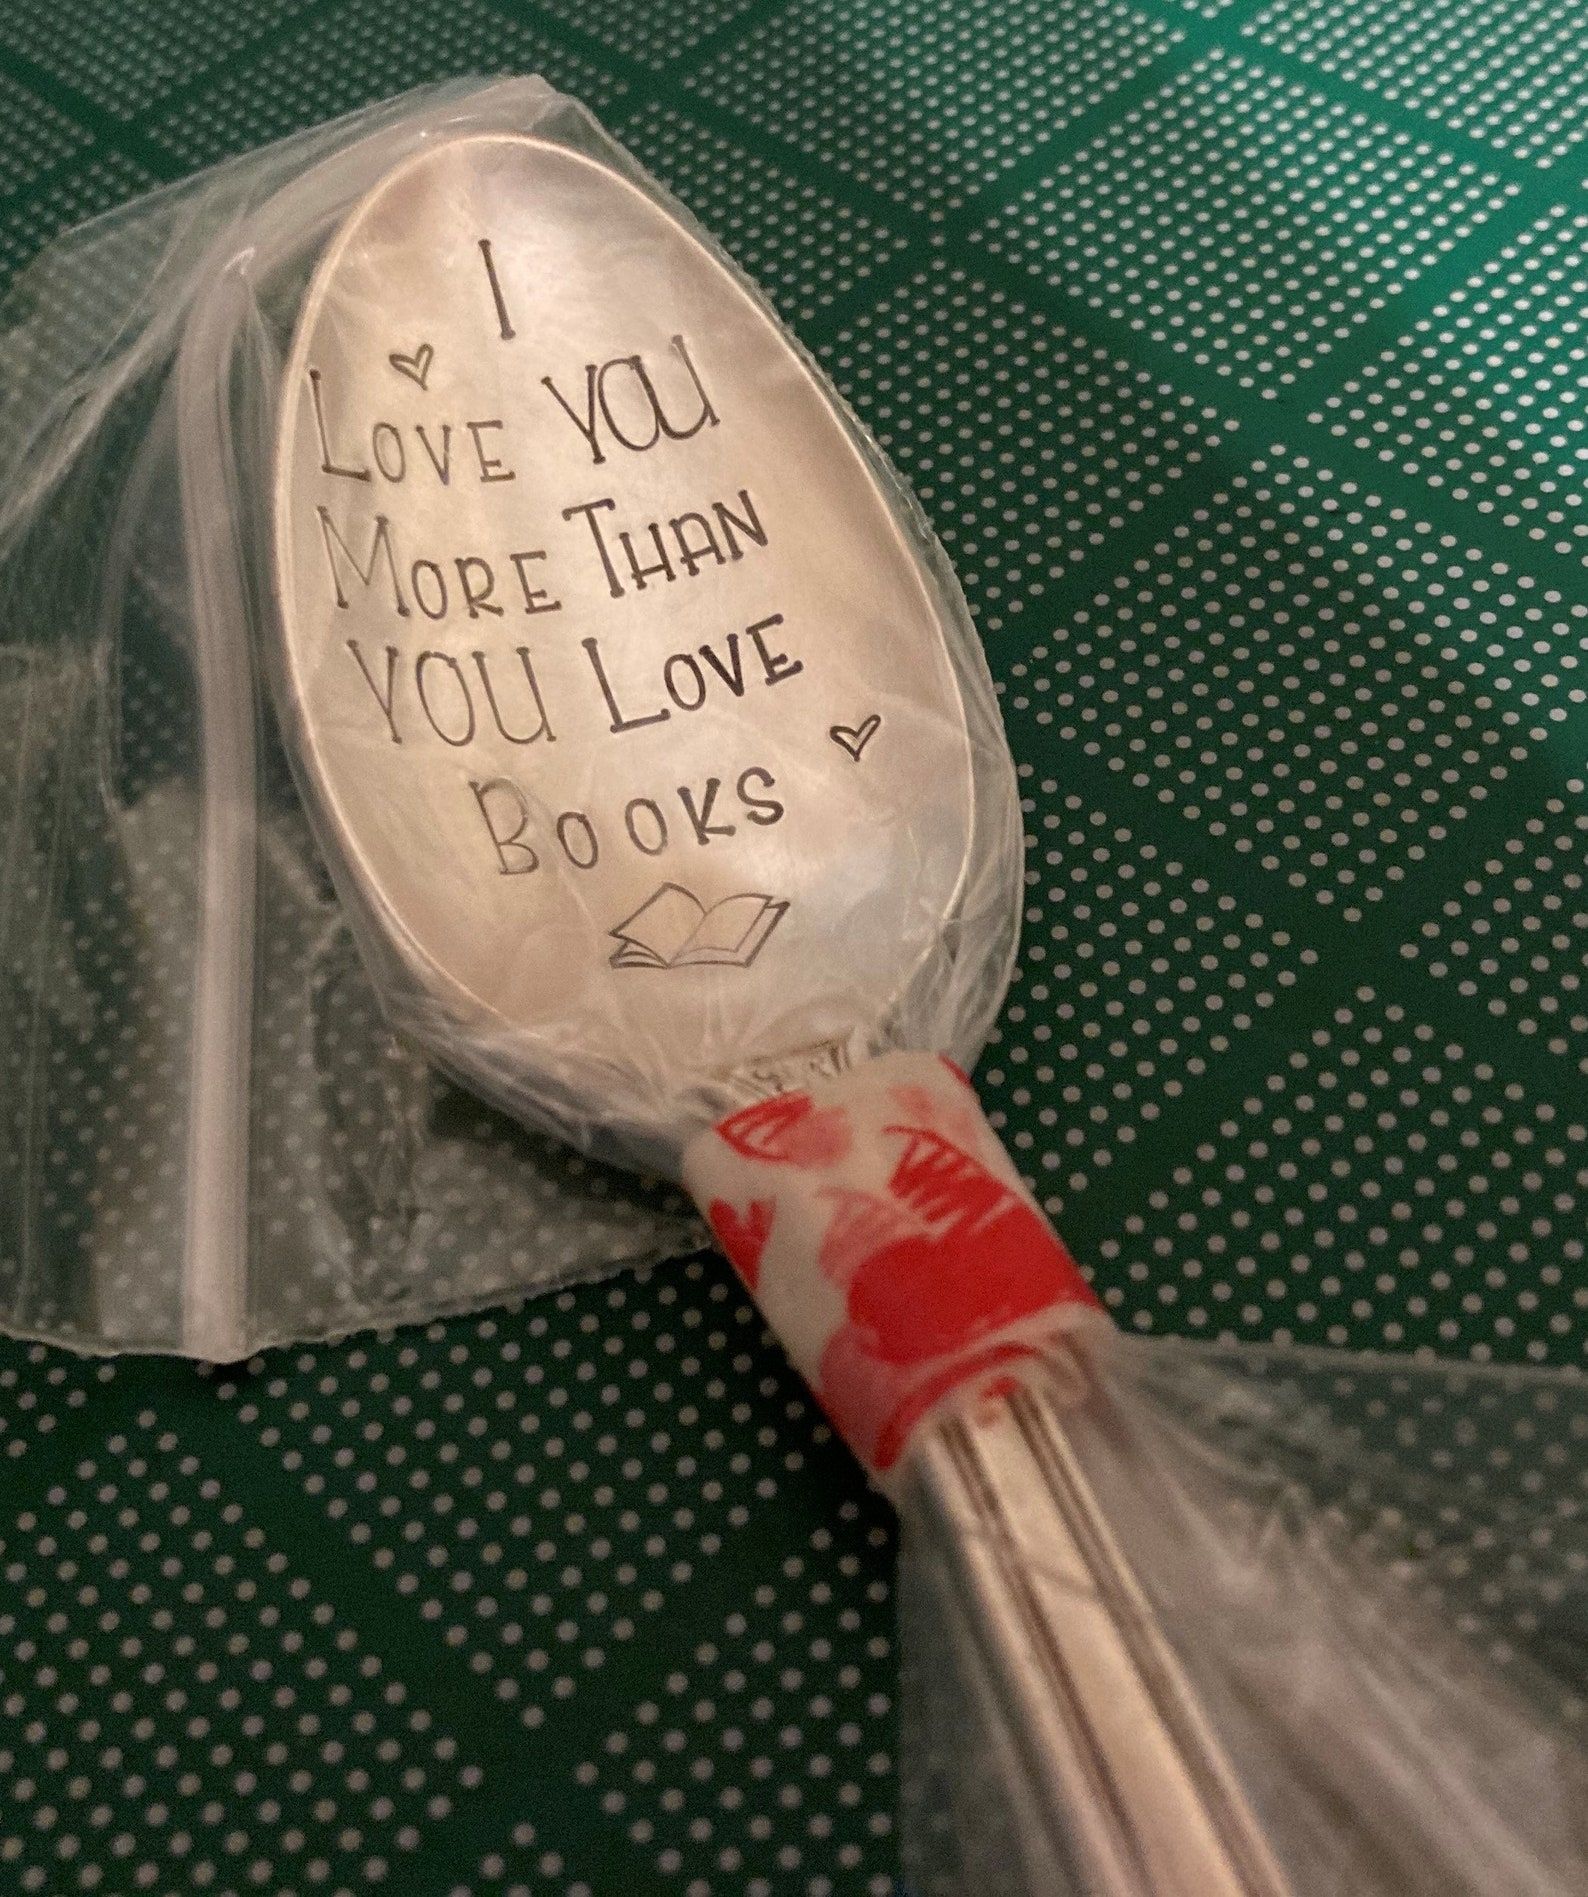 An engraved silver spoon lays on a green polkadot mat. The spoon is wrapped in plastic but the engraving is still visible, it reads, "I love you more than you love books."